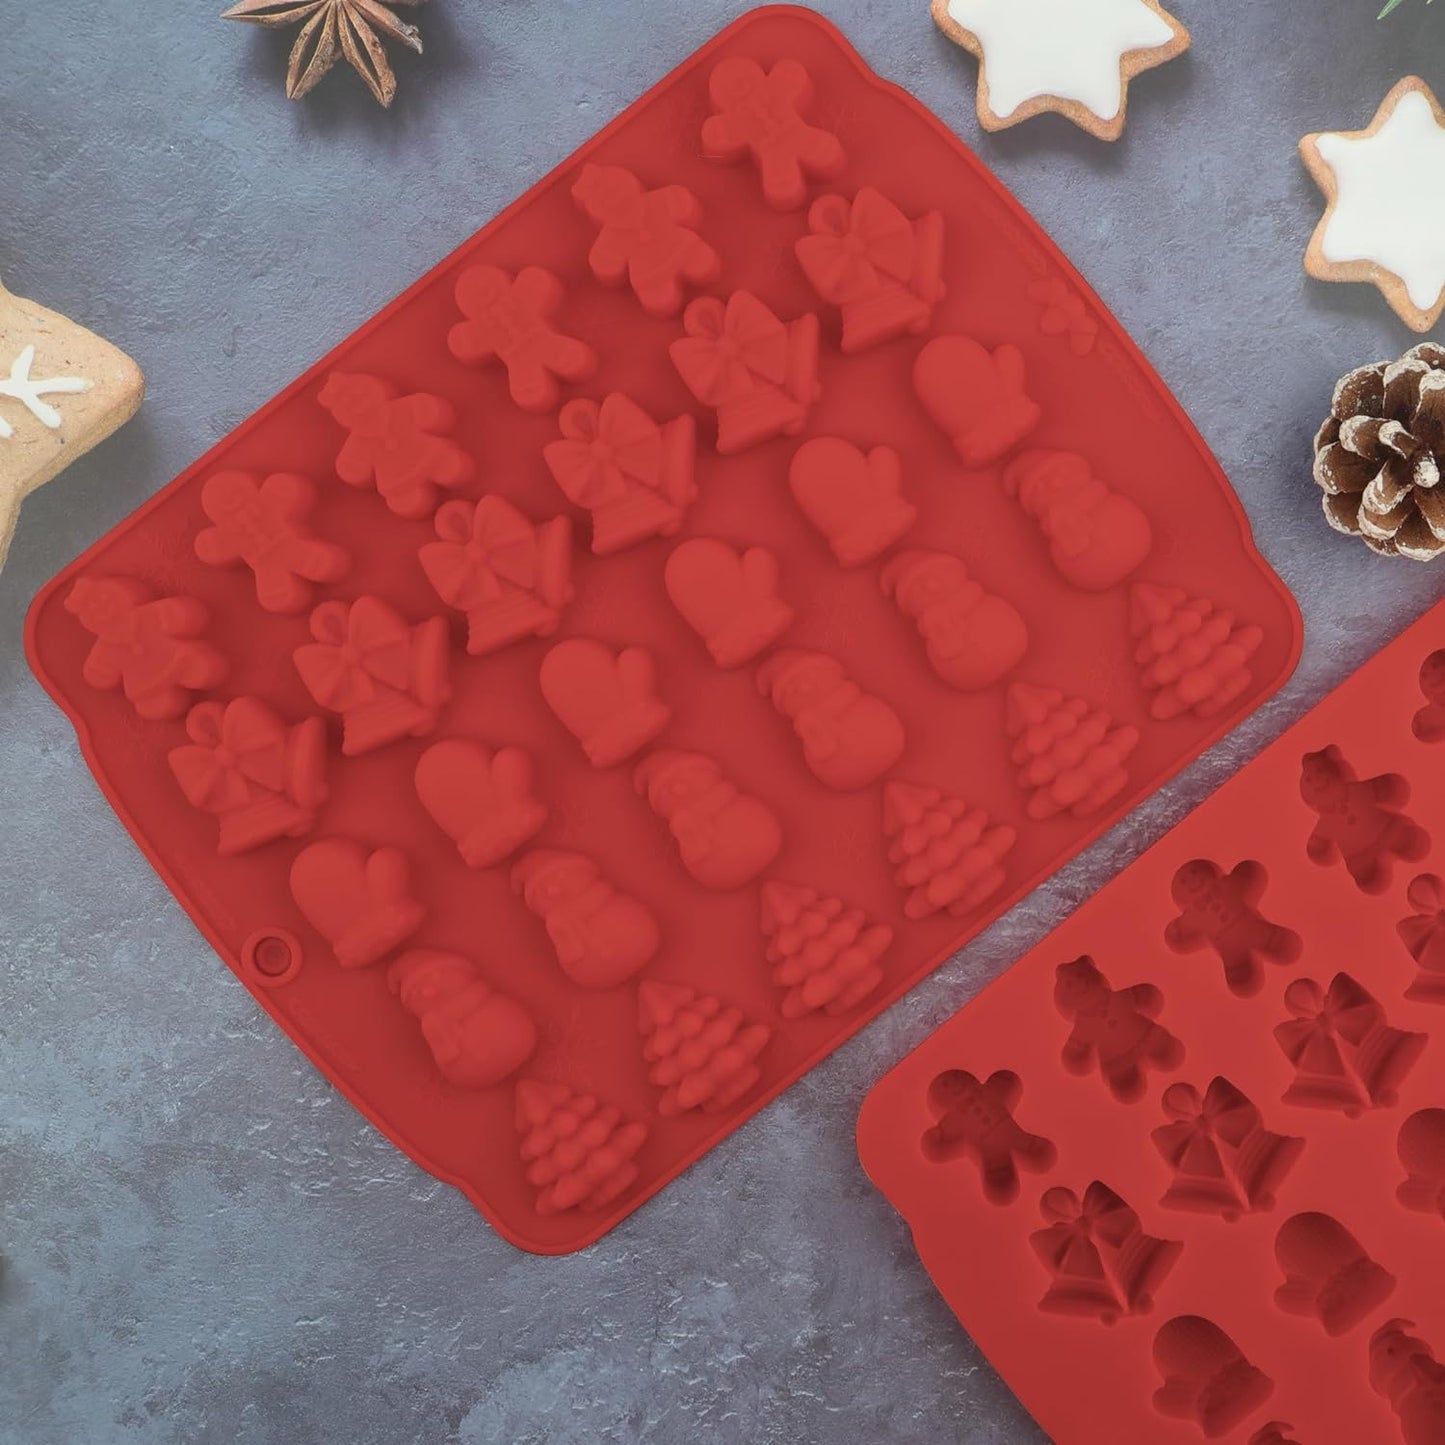 Christmas Candy Molds Silicone Chocolate Decoration Set of 2